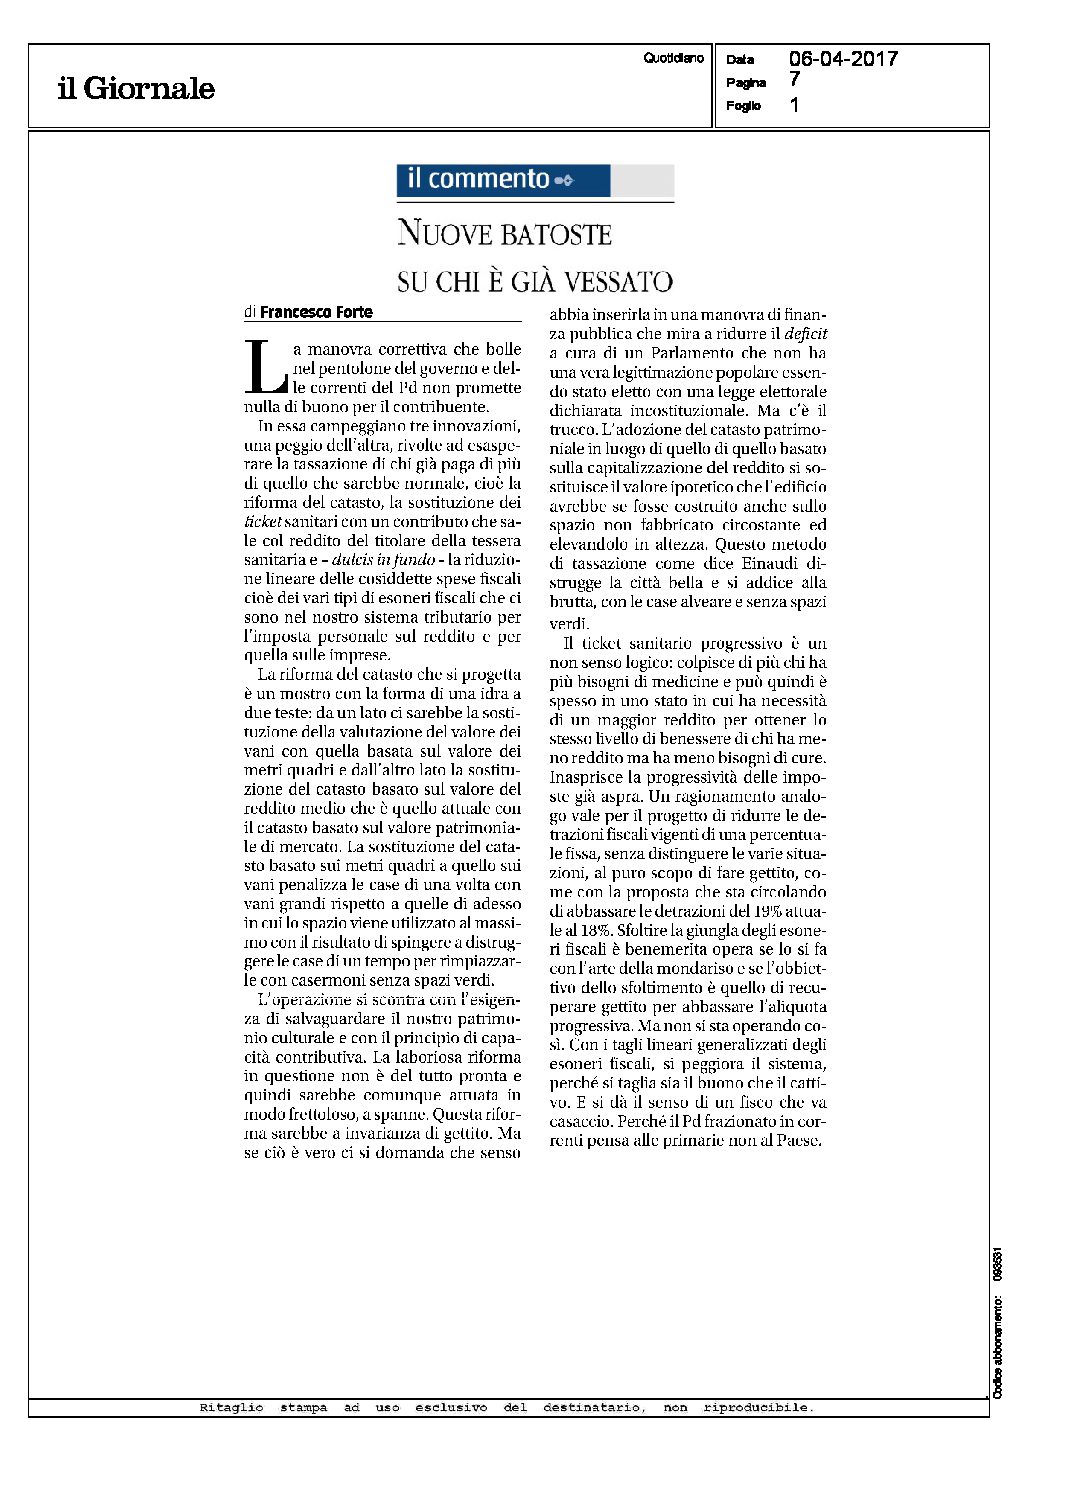 Giornale_6.4.17